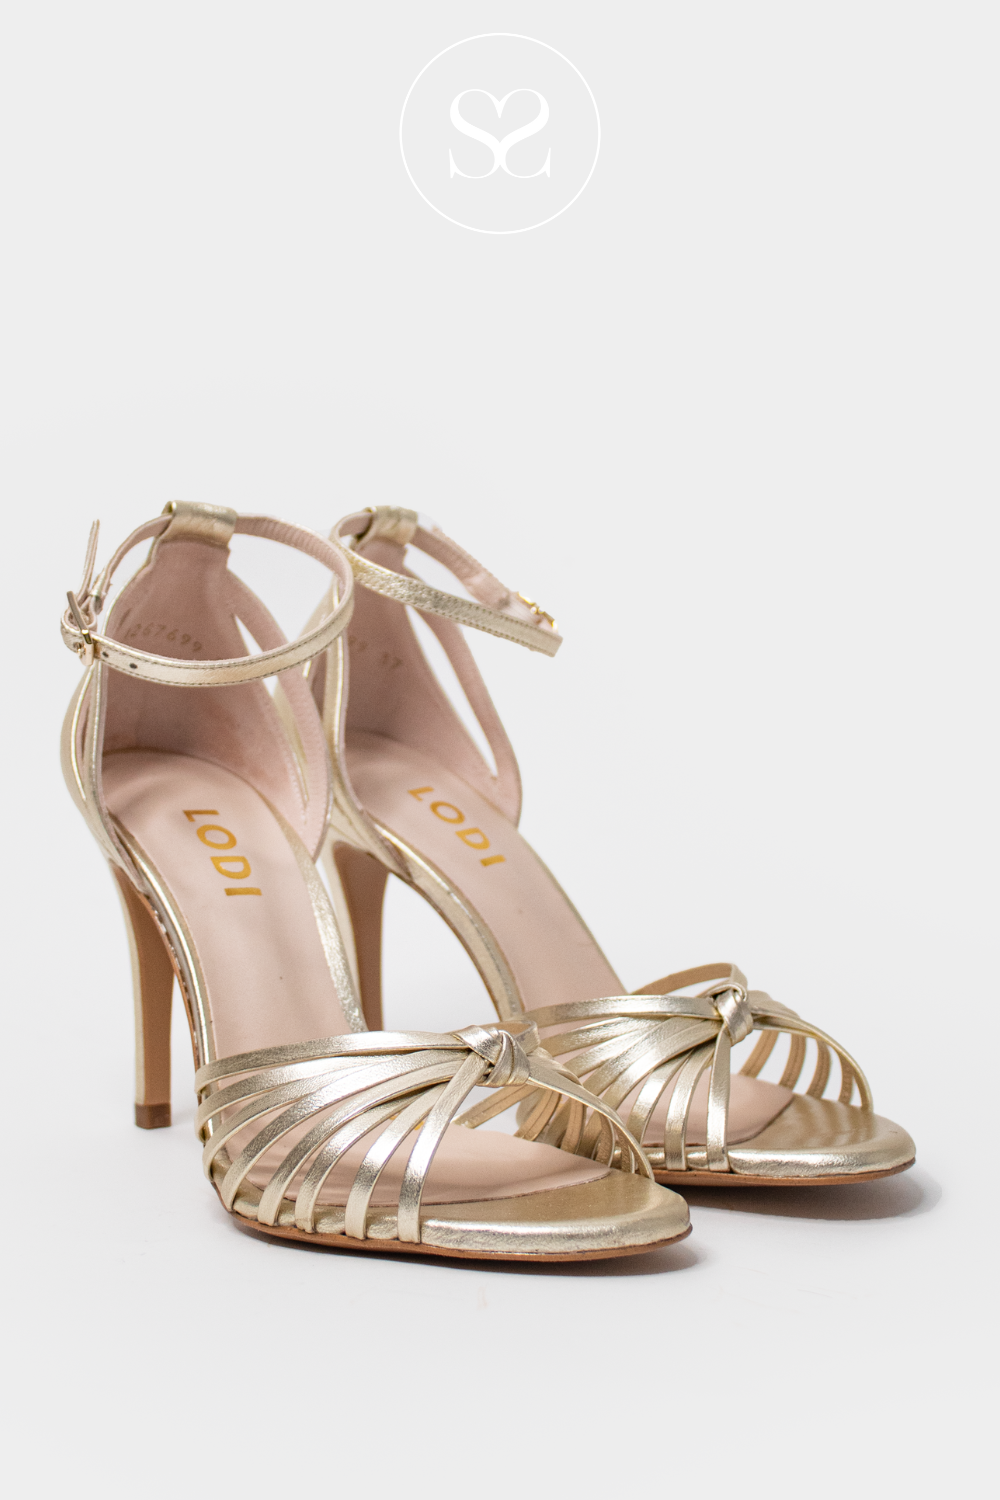 GOLD OCCASION SANDALS FOR WOMEN WITH HIGH HEEL - LODI